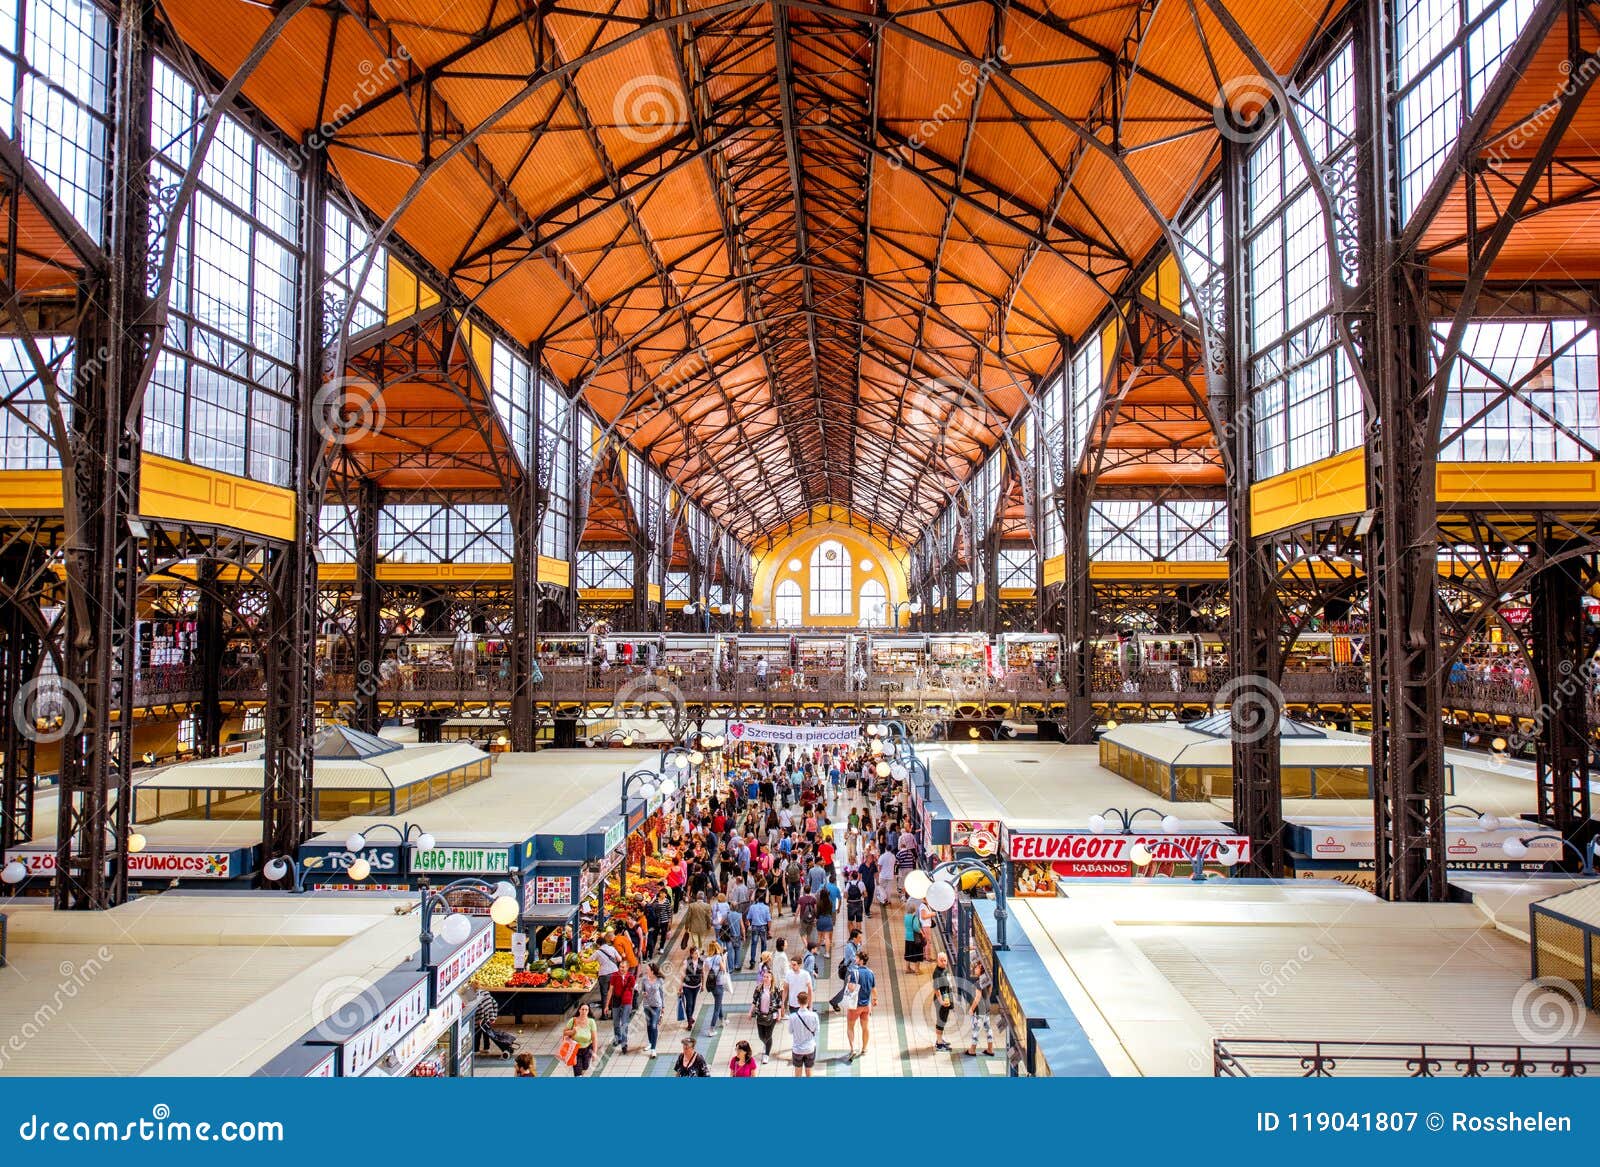 Great Market hall in Budapest. HUNGARY, BUDAPEST - MAY 19, 2018: Interior of the famous Great Market hall crowded with people, this building is largest and oldest indoor market in Budapest, Hungary